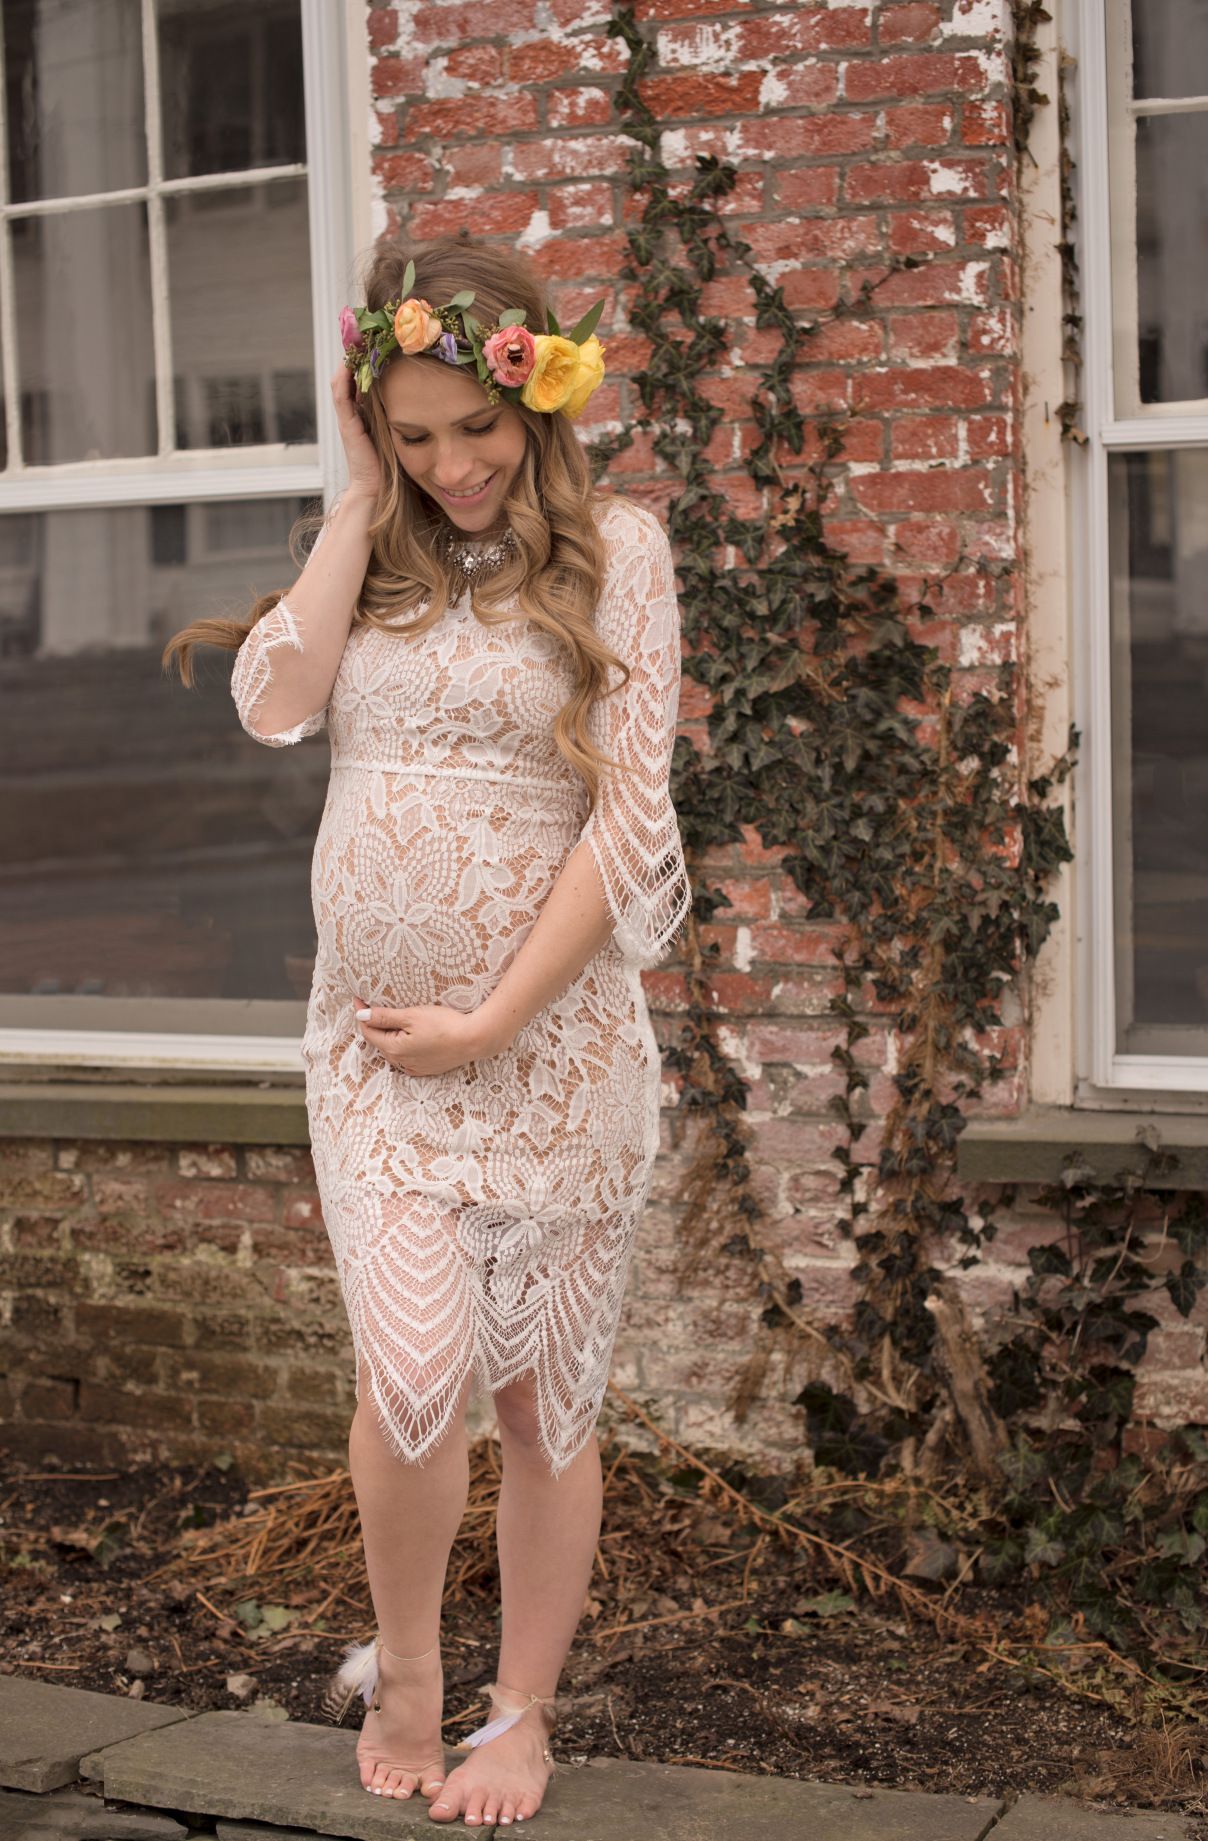 Full Size of Baby Shower:maternity Boutique Cute Maternity Dresses For Baby Shower Affordable Maternity Dresses For Baby Shower What To Wear To My Baby Shower Baby Shower Dresses Cute Inexpensive Maternity Clothes Maternity Evening Gowns Plus Size Maternity Dresses For Baby Shower